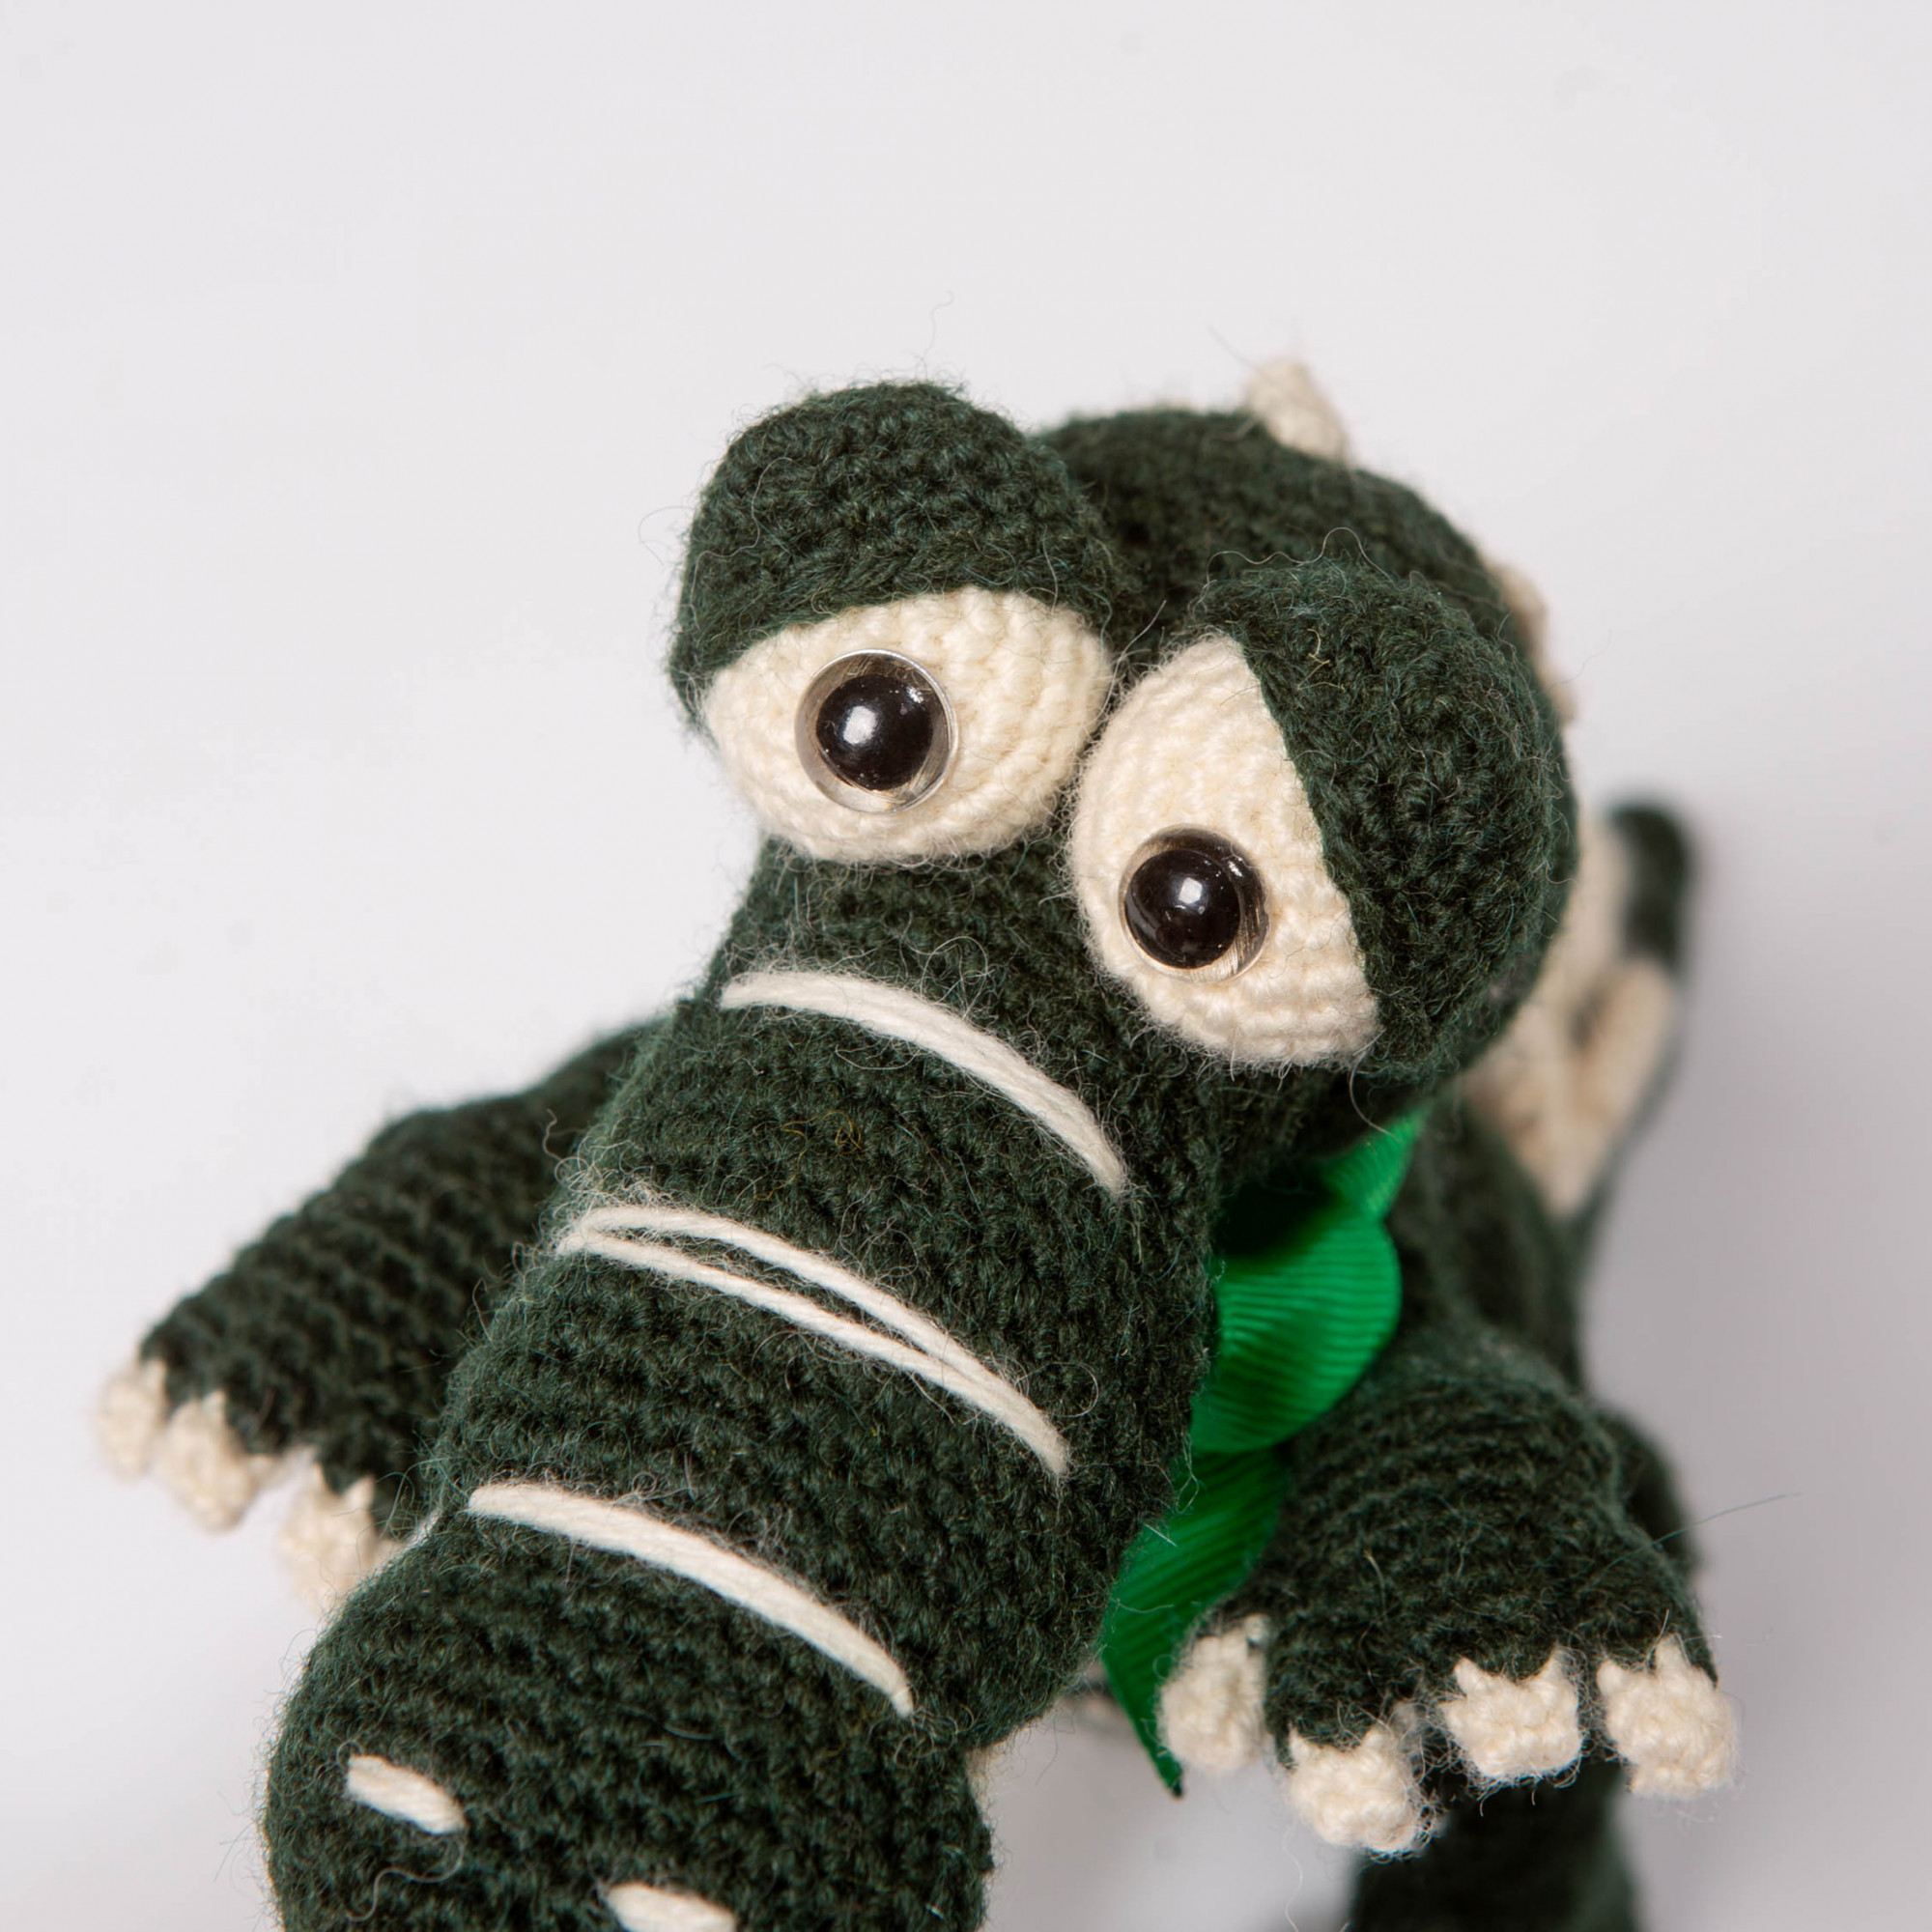 Green Aligator for Your Kid Crochet Soft Toy